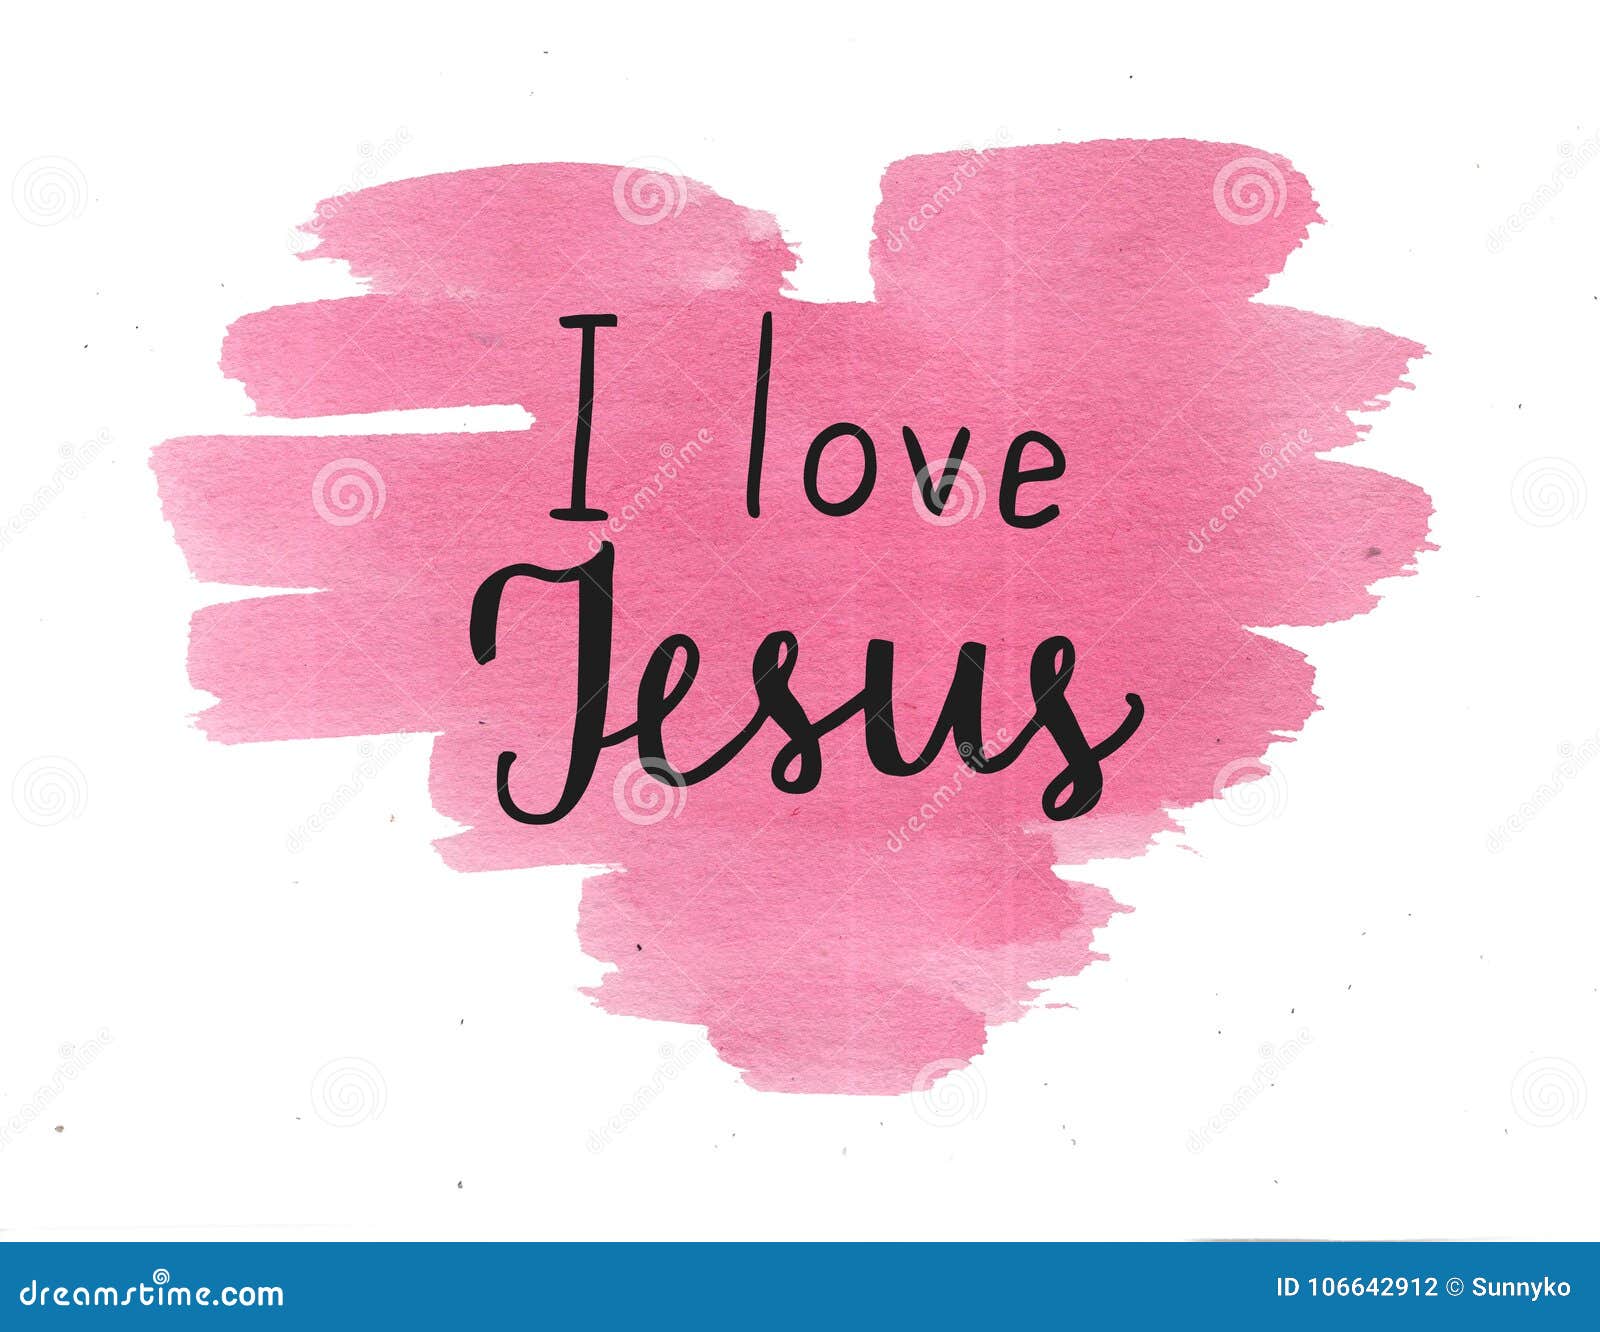 Hand Lettering I Love Jesus on Watercolor Background. Stock ...